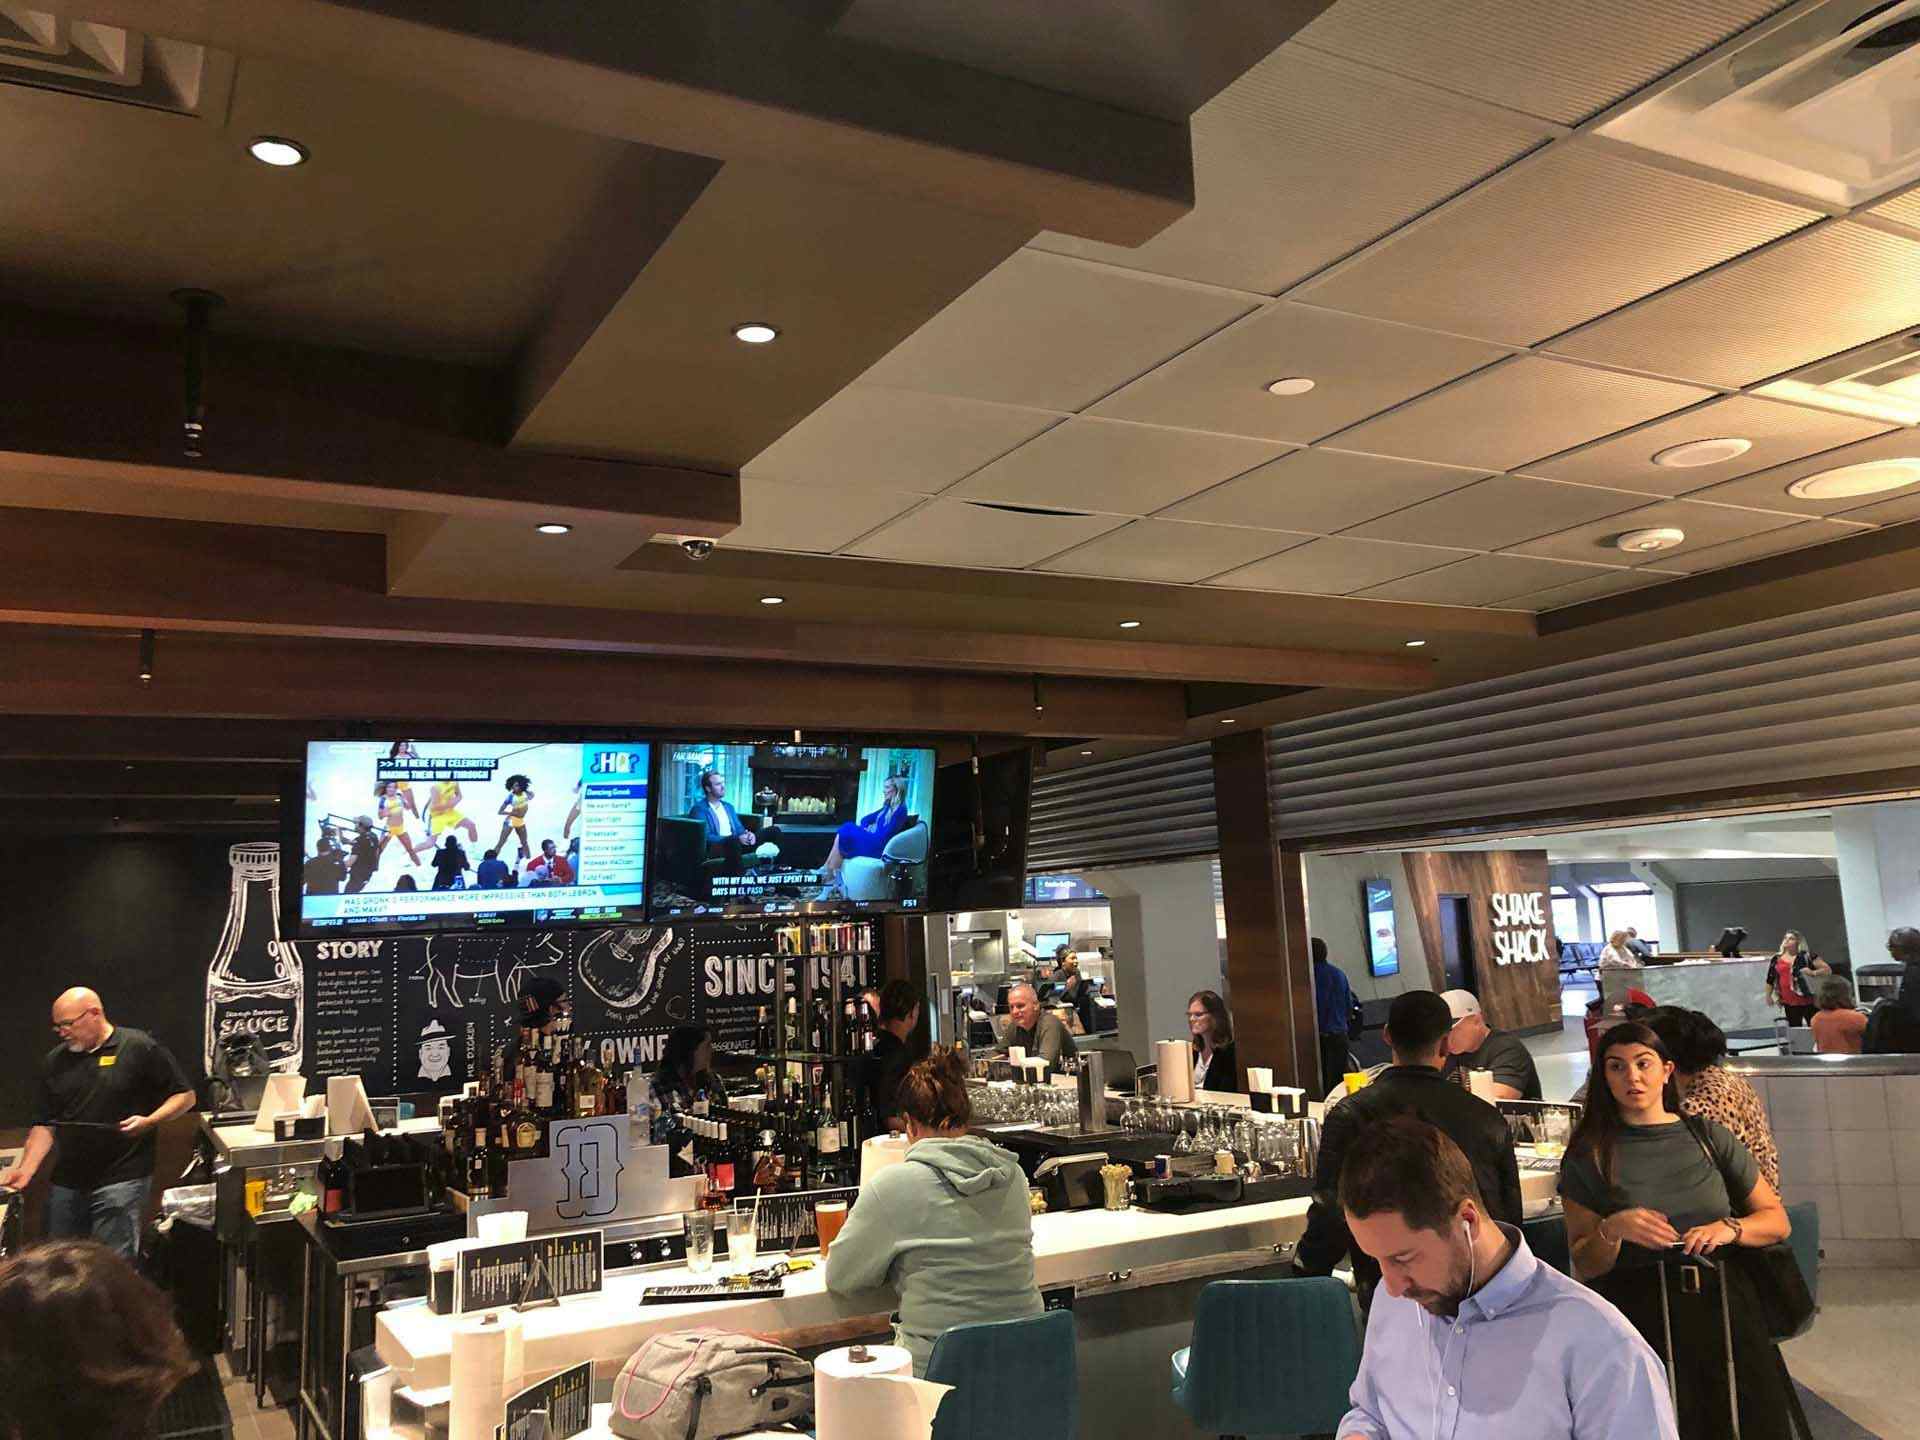 Franchising.com: Dickey’s Barbecue Pit Lands at DFW Airport with a Full Bar